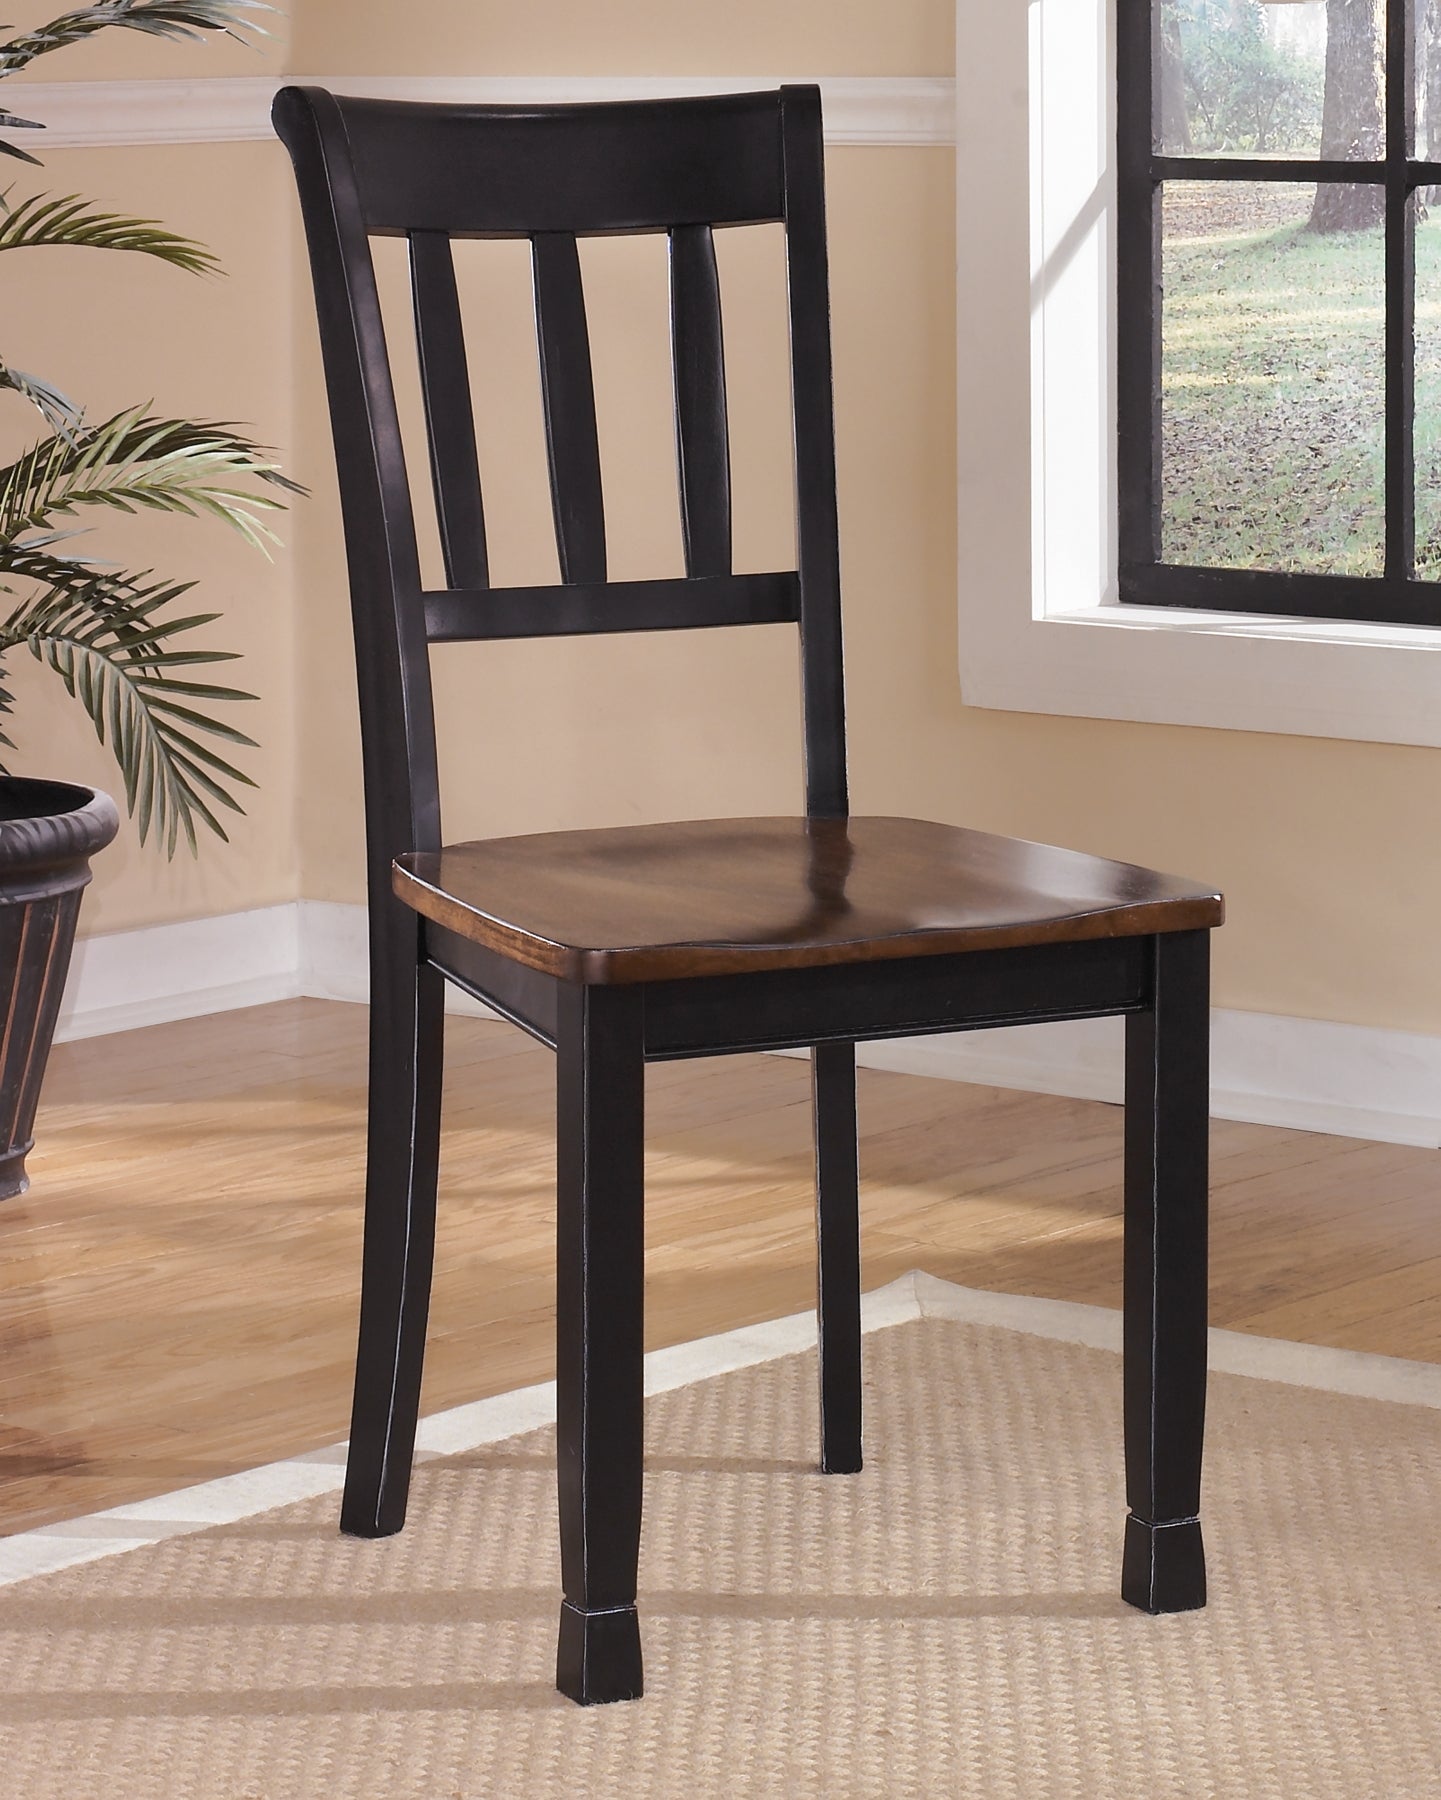 Owingsville Dining Table and 4 Chairs Rent Wise Rent To Own Jacksonville, Florida